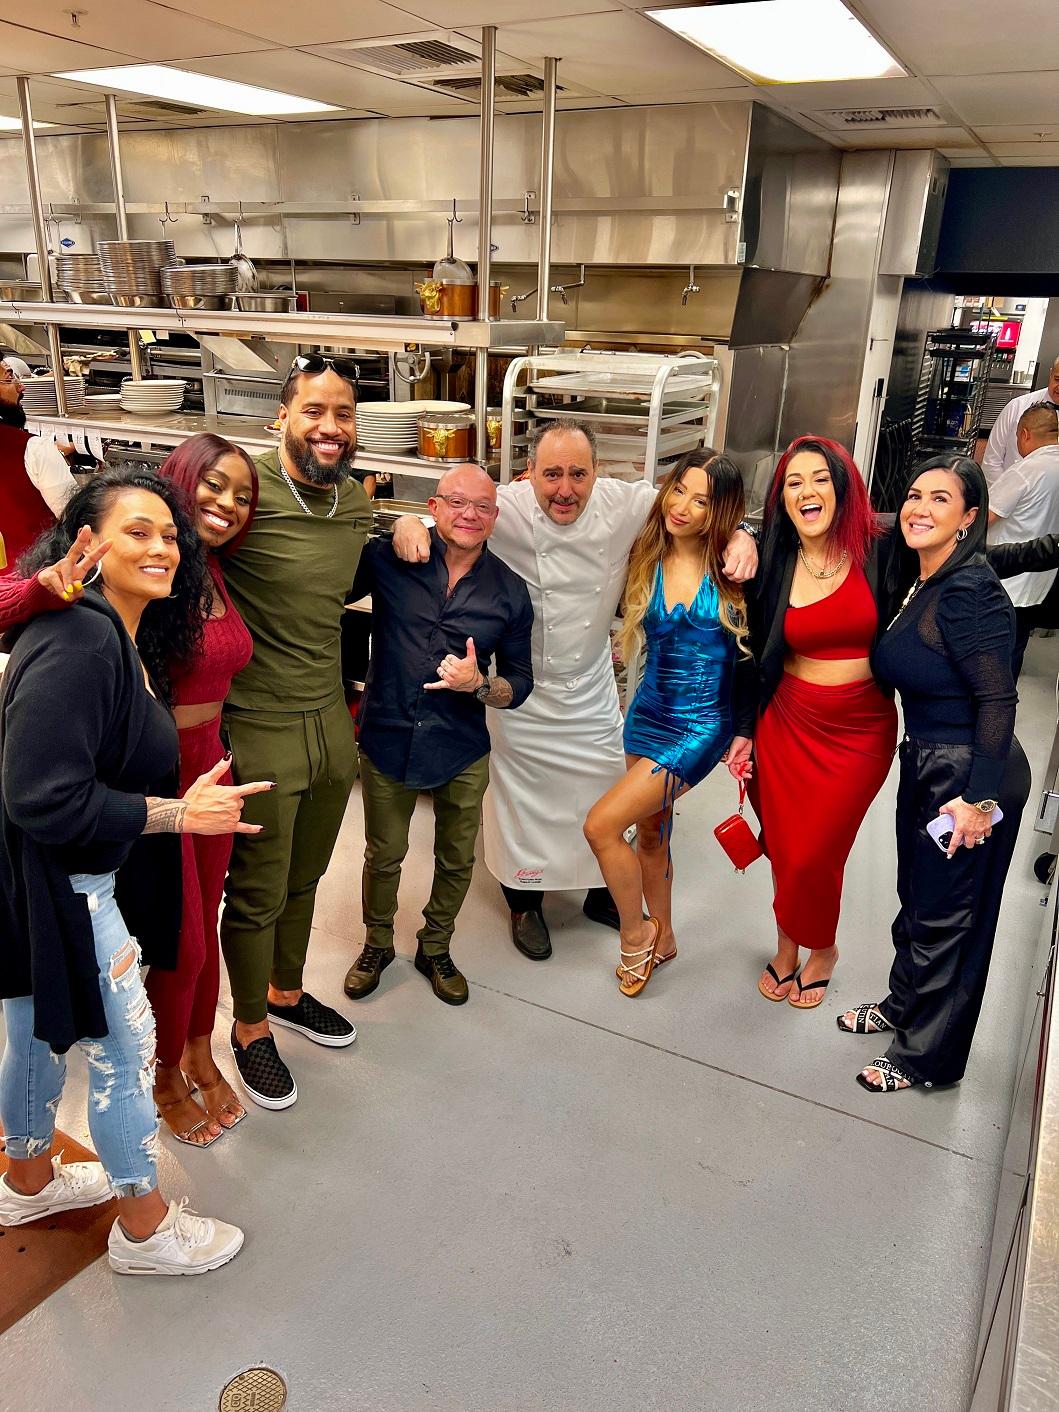 WWE, UFC and MLB Superstars Spotted Partying At Circa Las Vegas